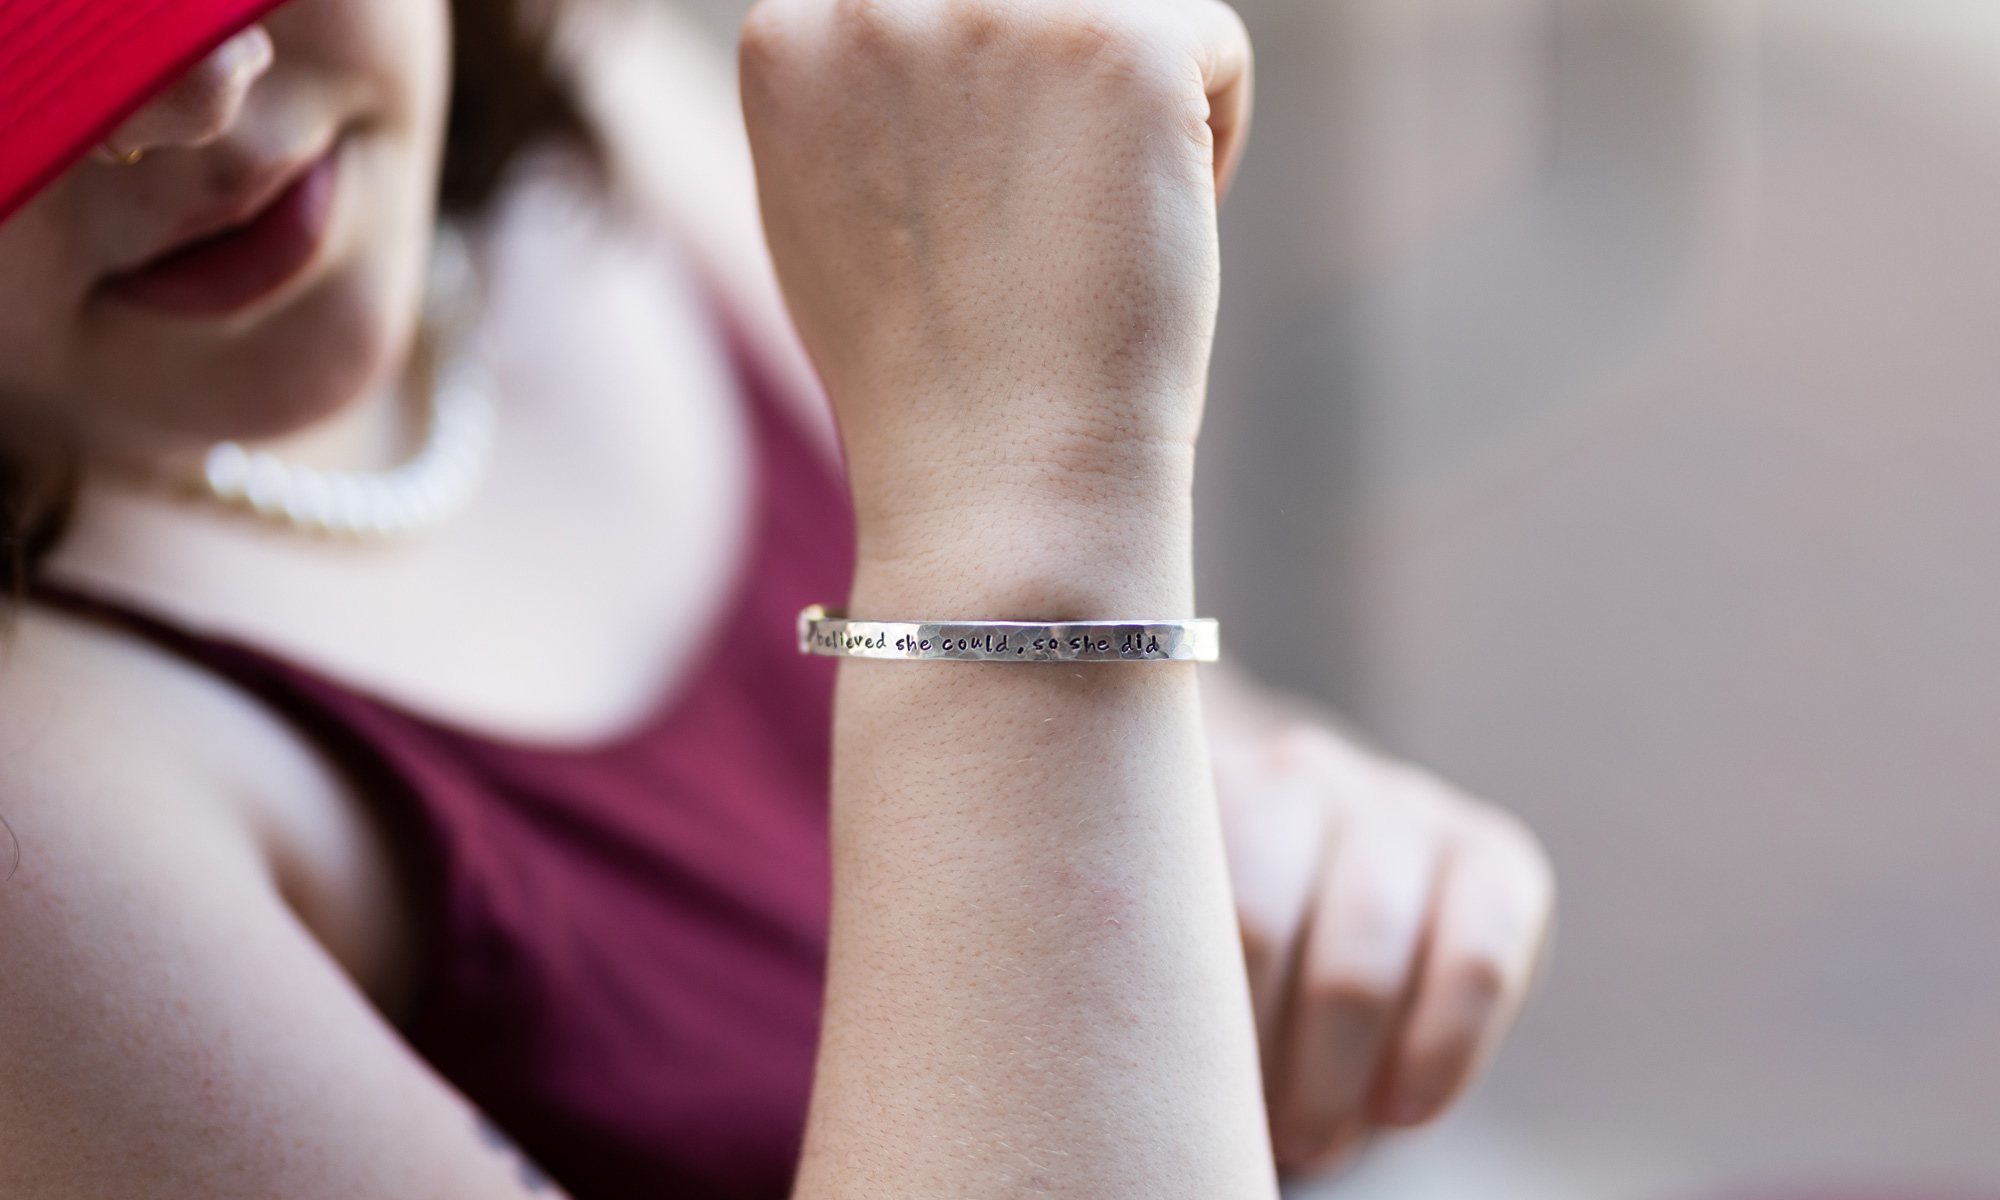 A silver bracelet, inscribed with the quote She believed she could, so she did